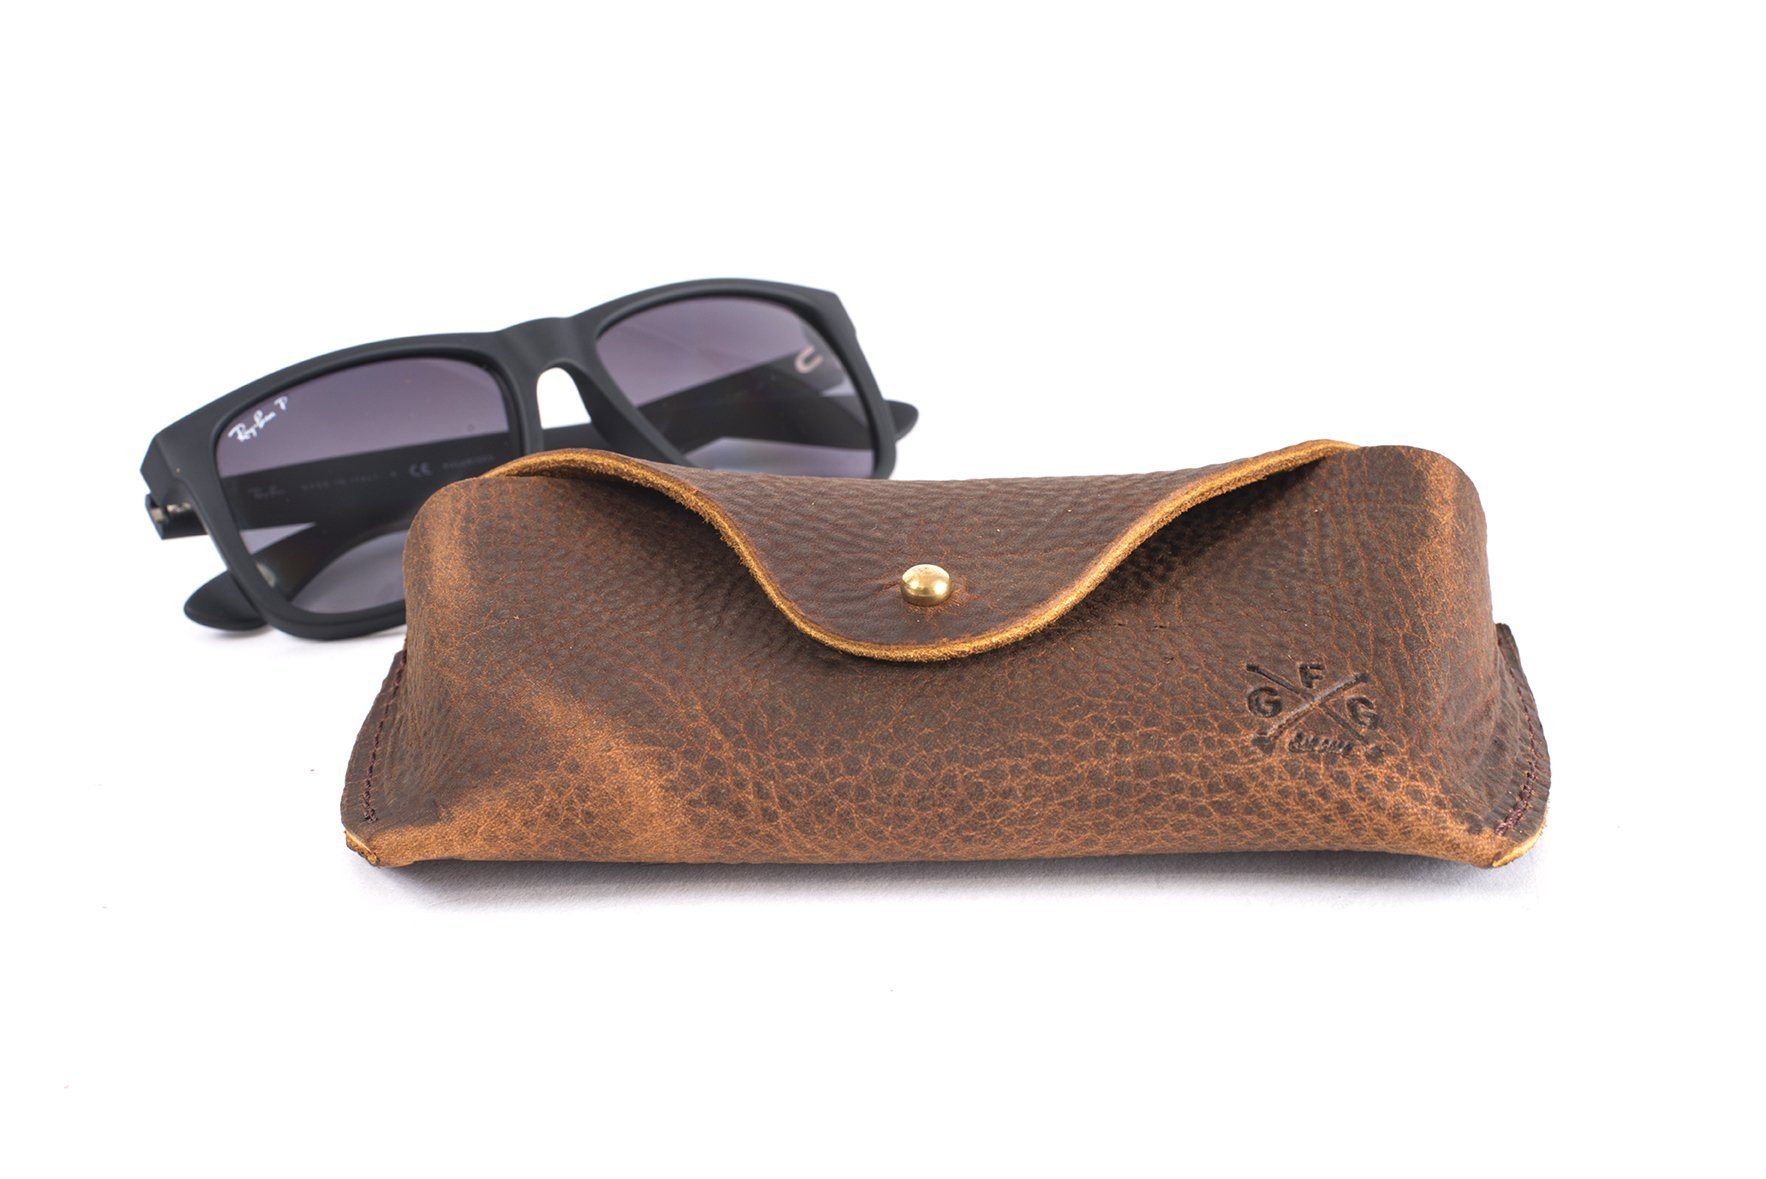  Leather Glasses Sleeve Free Personalization, Glasses Case  Leather, Sunglasses Case Leather, Soft Glasses Case